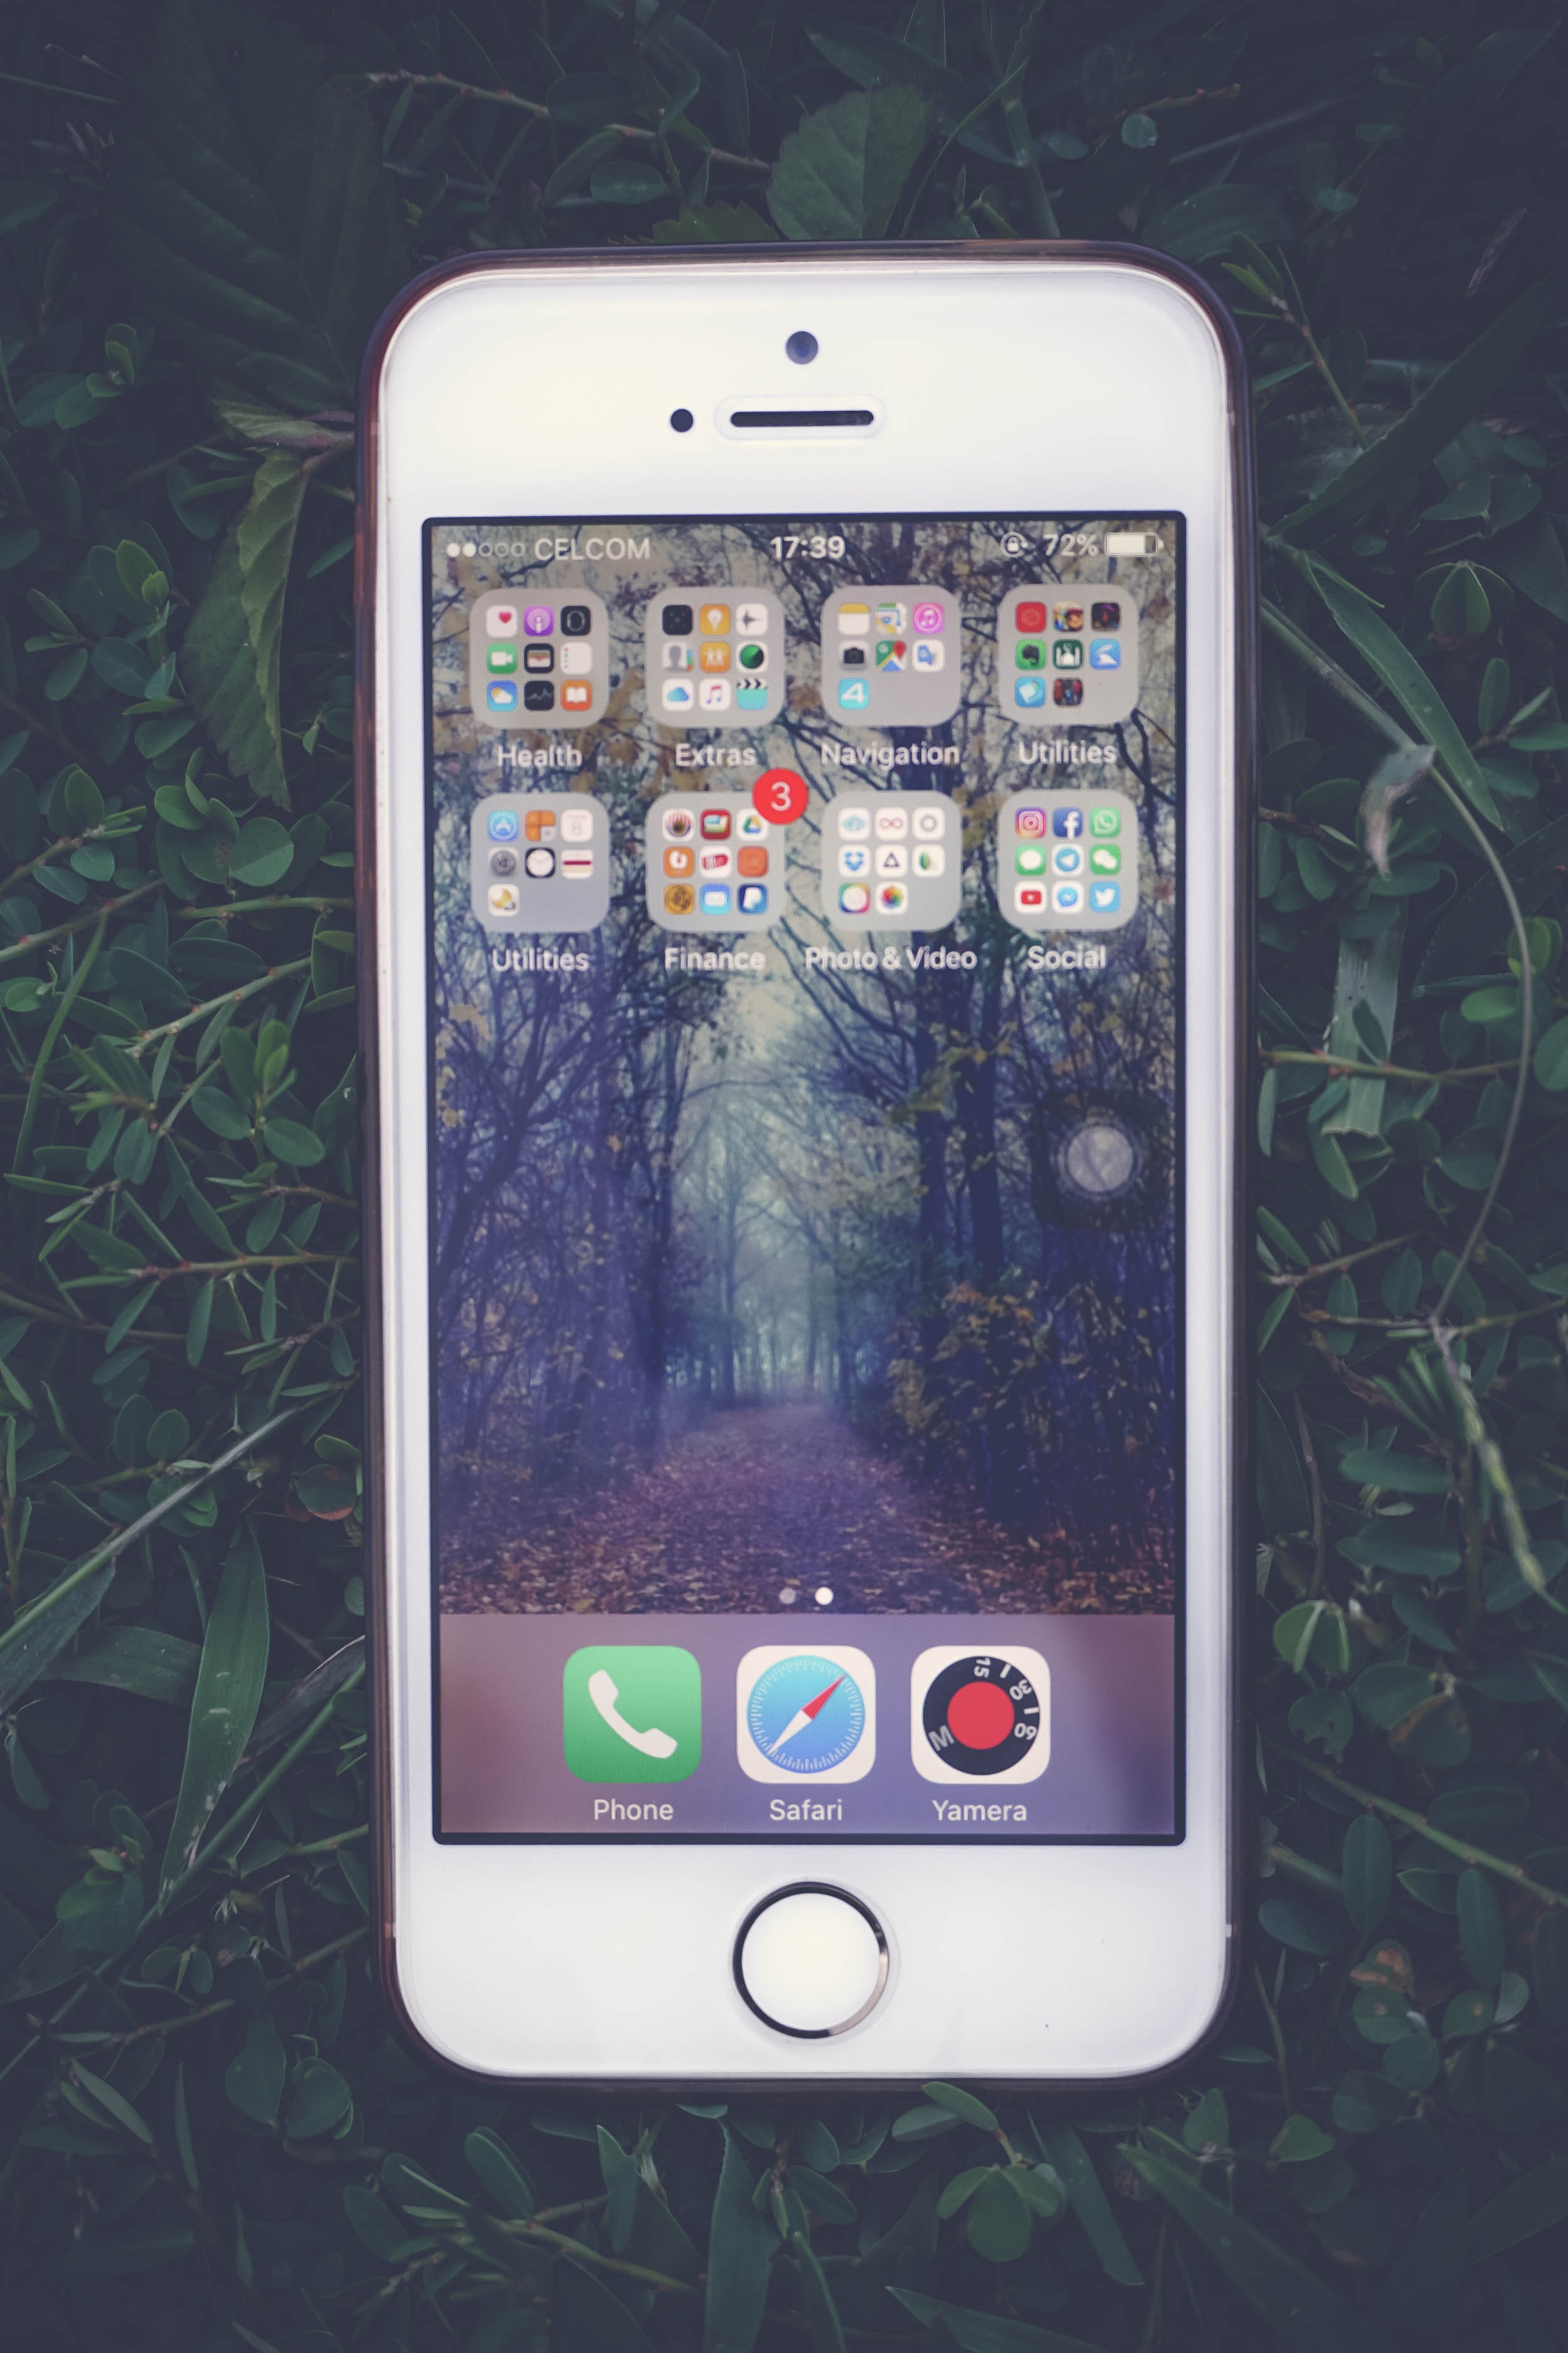 Silver Iphone 5 S, Applications, Multimedia, Trees, Touch screen, HQ Photo